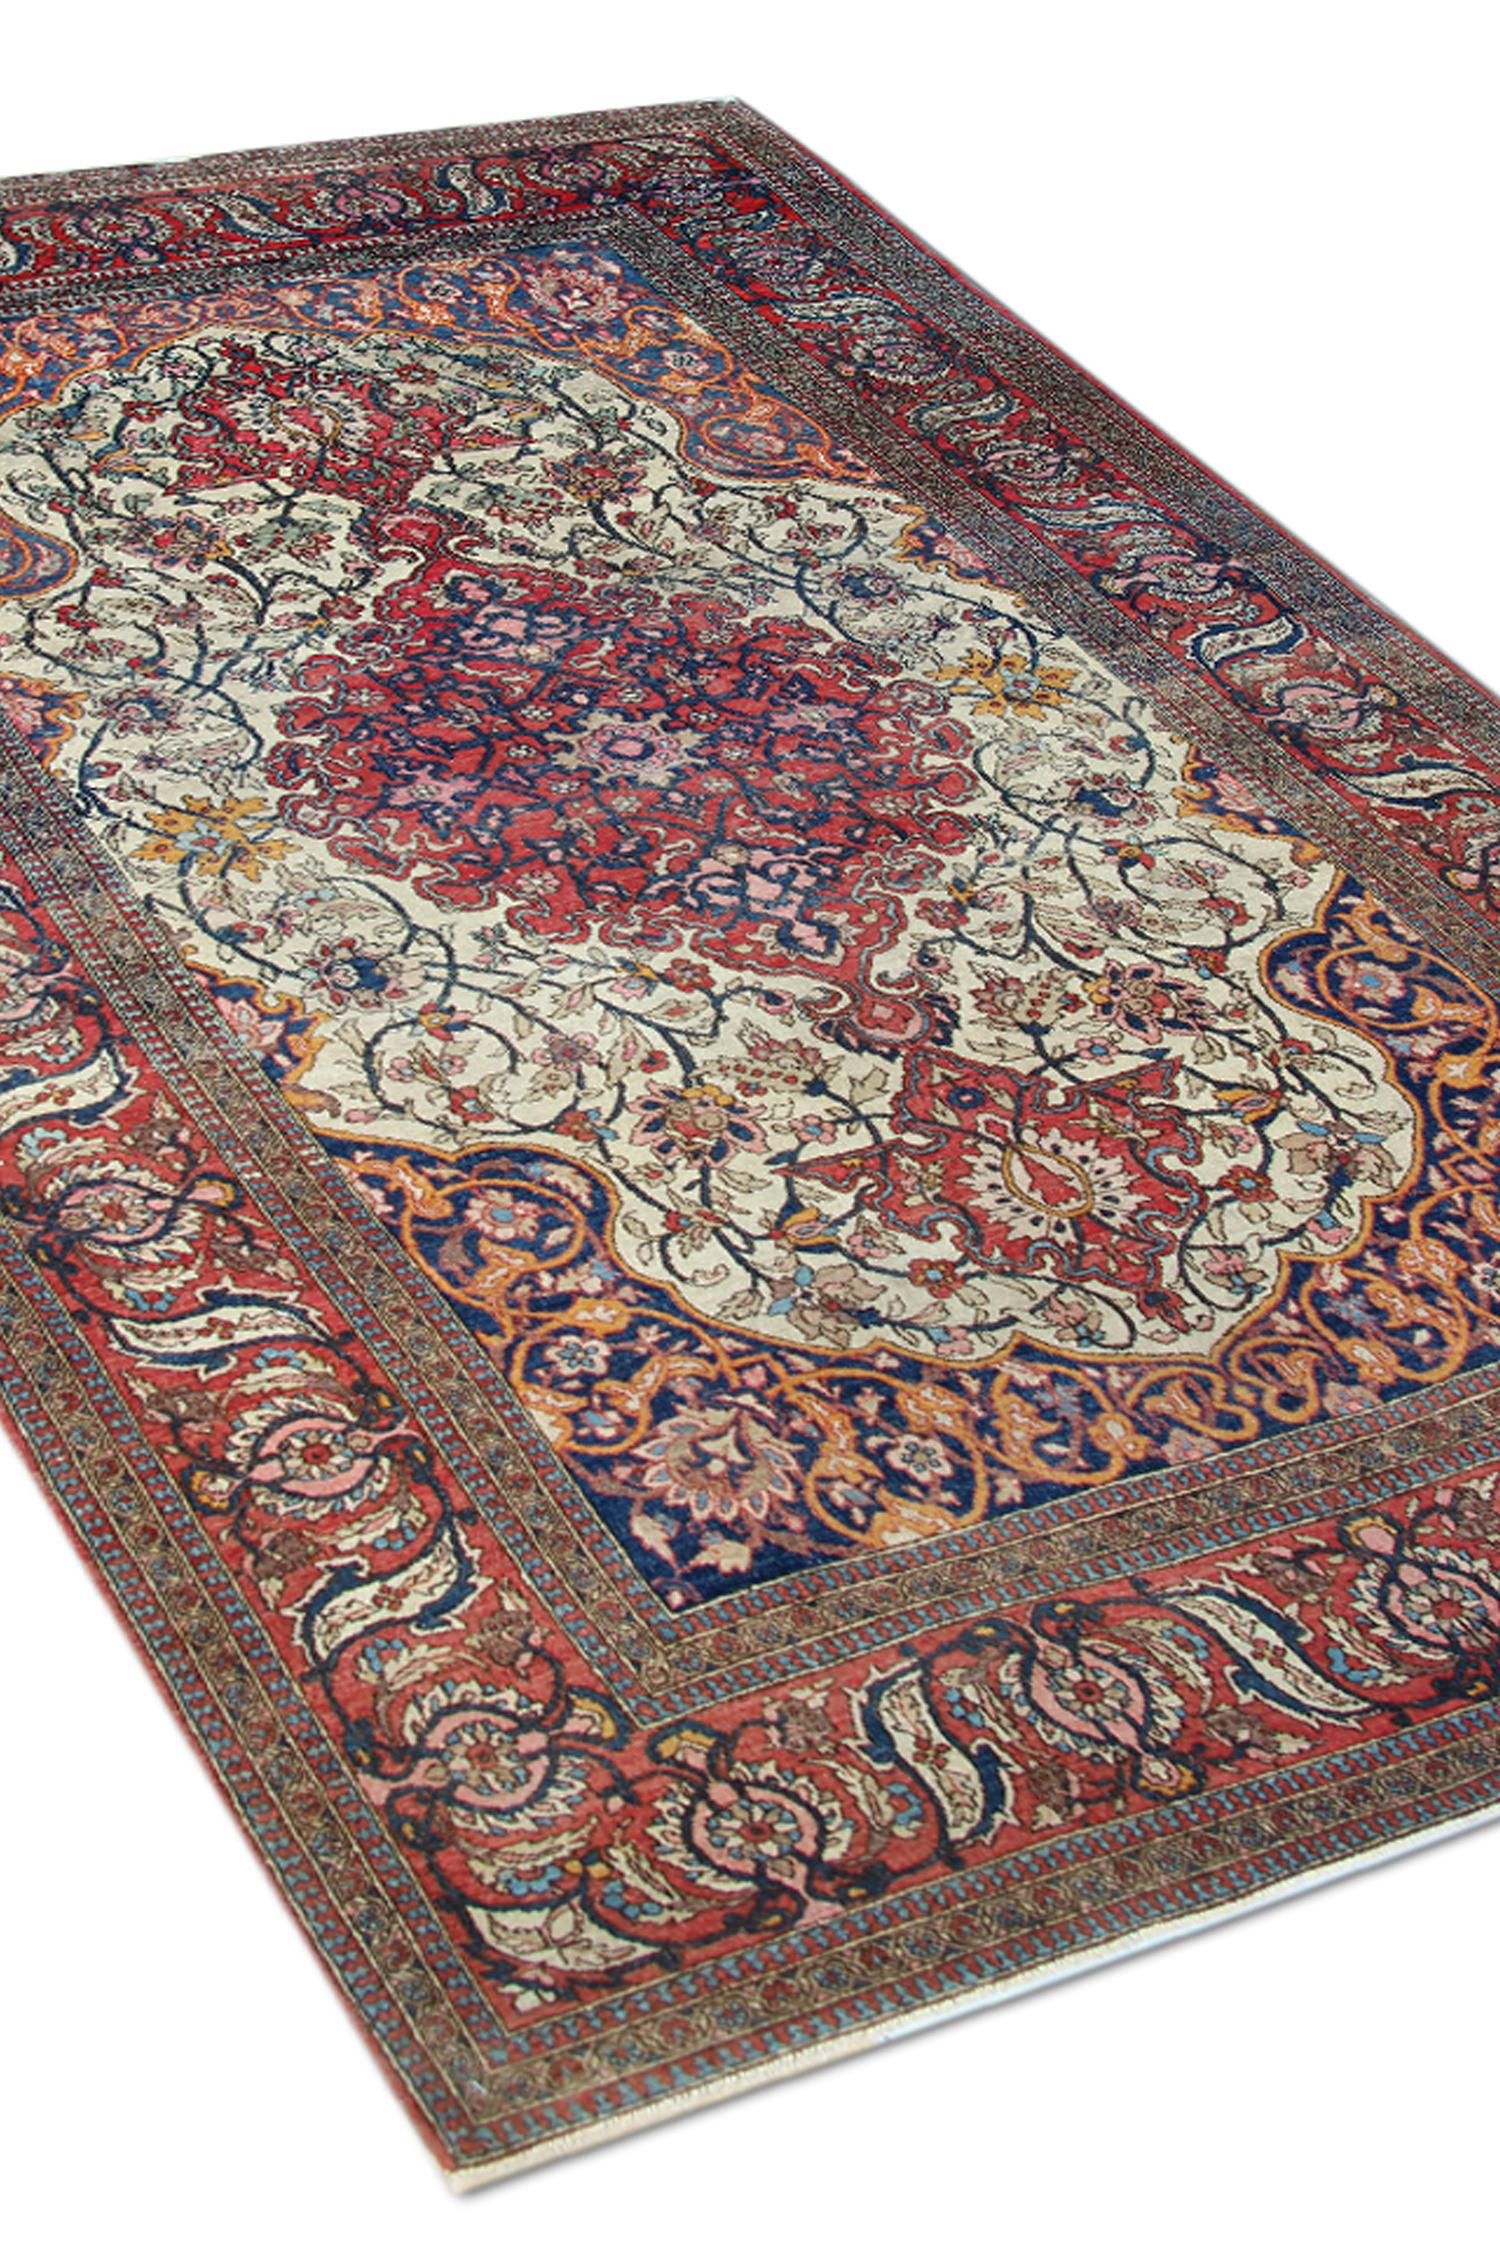 An antique central medallion rug is a fine example of an Antique Rug woven in the 1900s. Handwoven with intricate details in orange blue and red accent colours. The design features an ivory central field with a highly detailed central medallion of